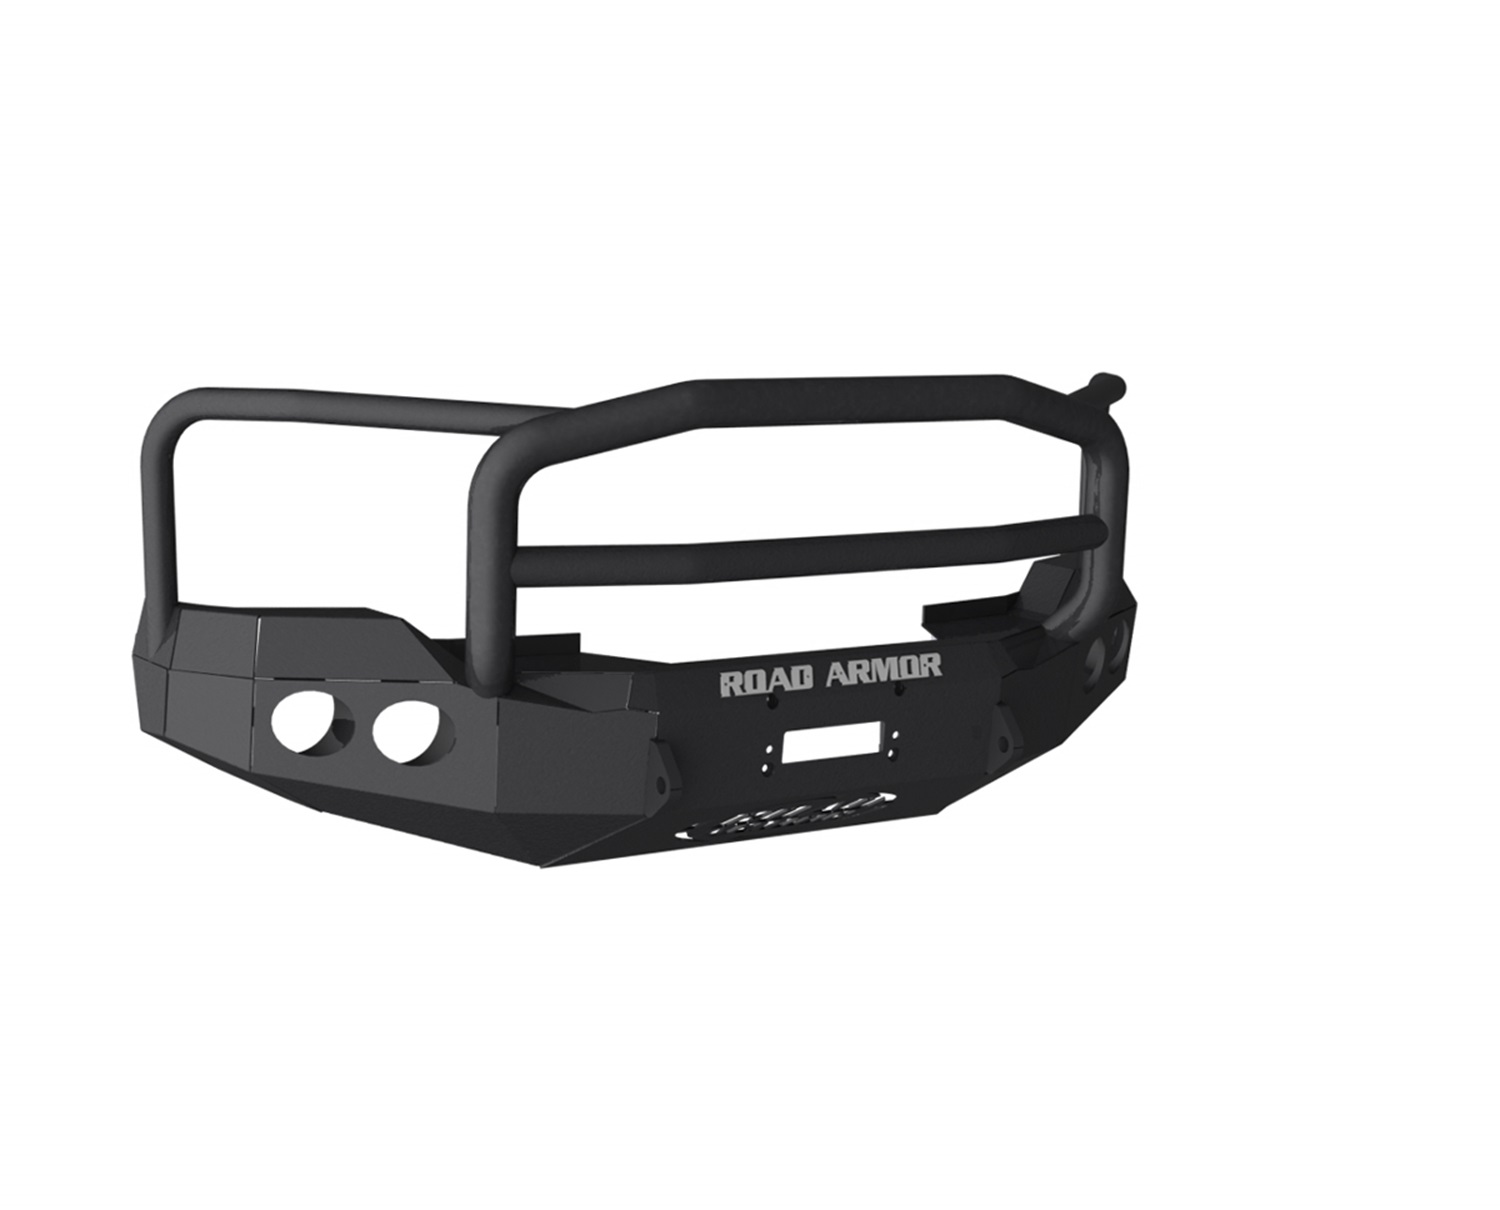 Road Armor Road Armor 61105B Front Stealth Bumper